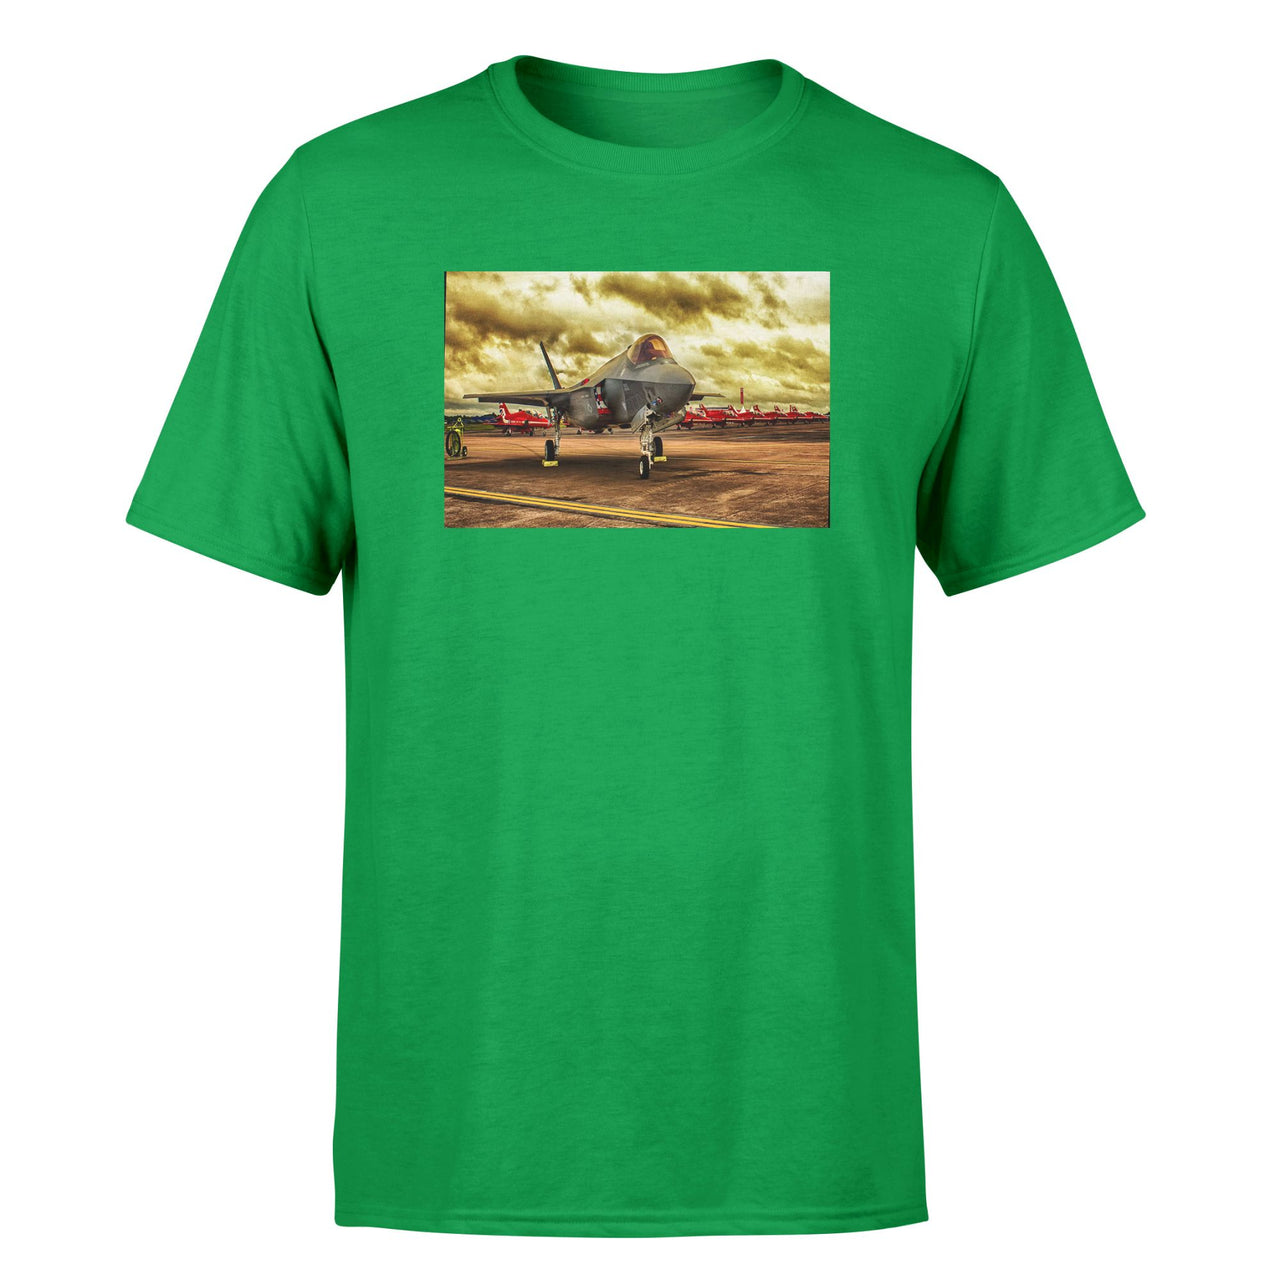 Fighting Falcon F35 at Airbase Designed T-Shirts